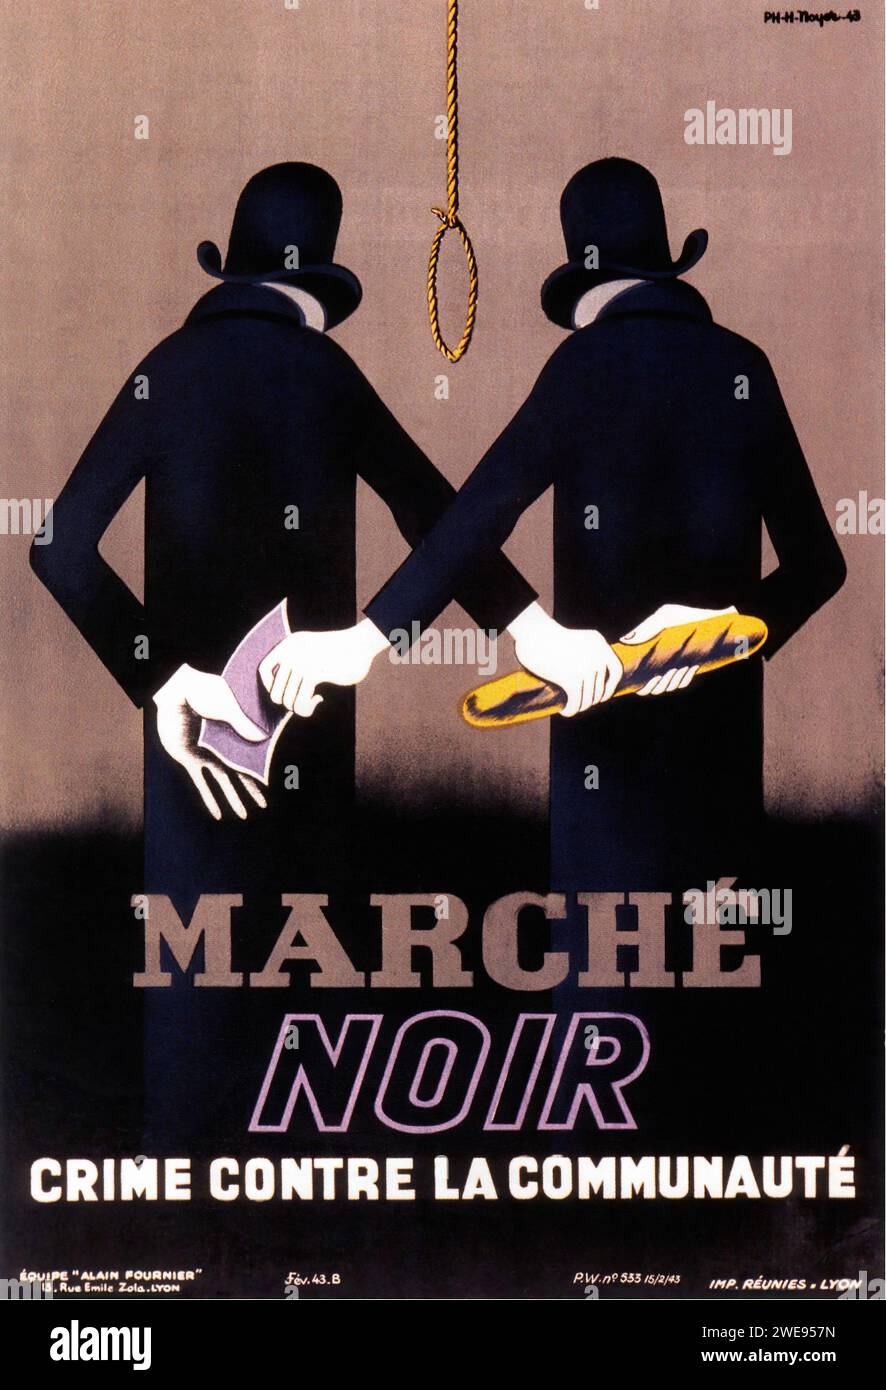 ['MARCHE NOIR CRIME CONTRE LA COMMUNAUTÉ'] ['BLACK MARKET CRIME AGAINST THE COMMUNITY'] Vintage French Advertising; Features two shadowy figures exchanging goods with a hanging noose in the background. This poster, in a stark graphic style, likely relates to wartime black market activities. Stock Photo